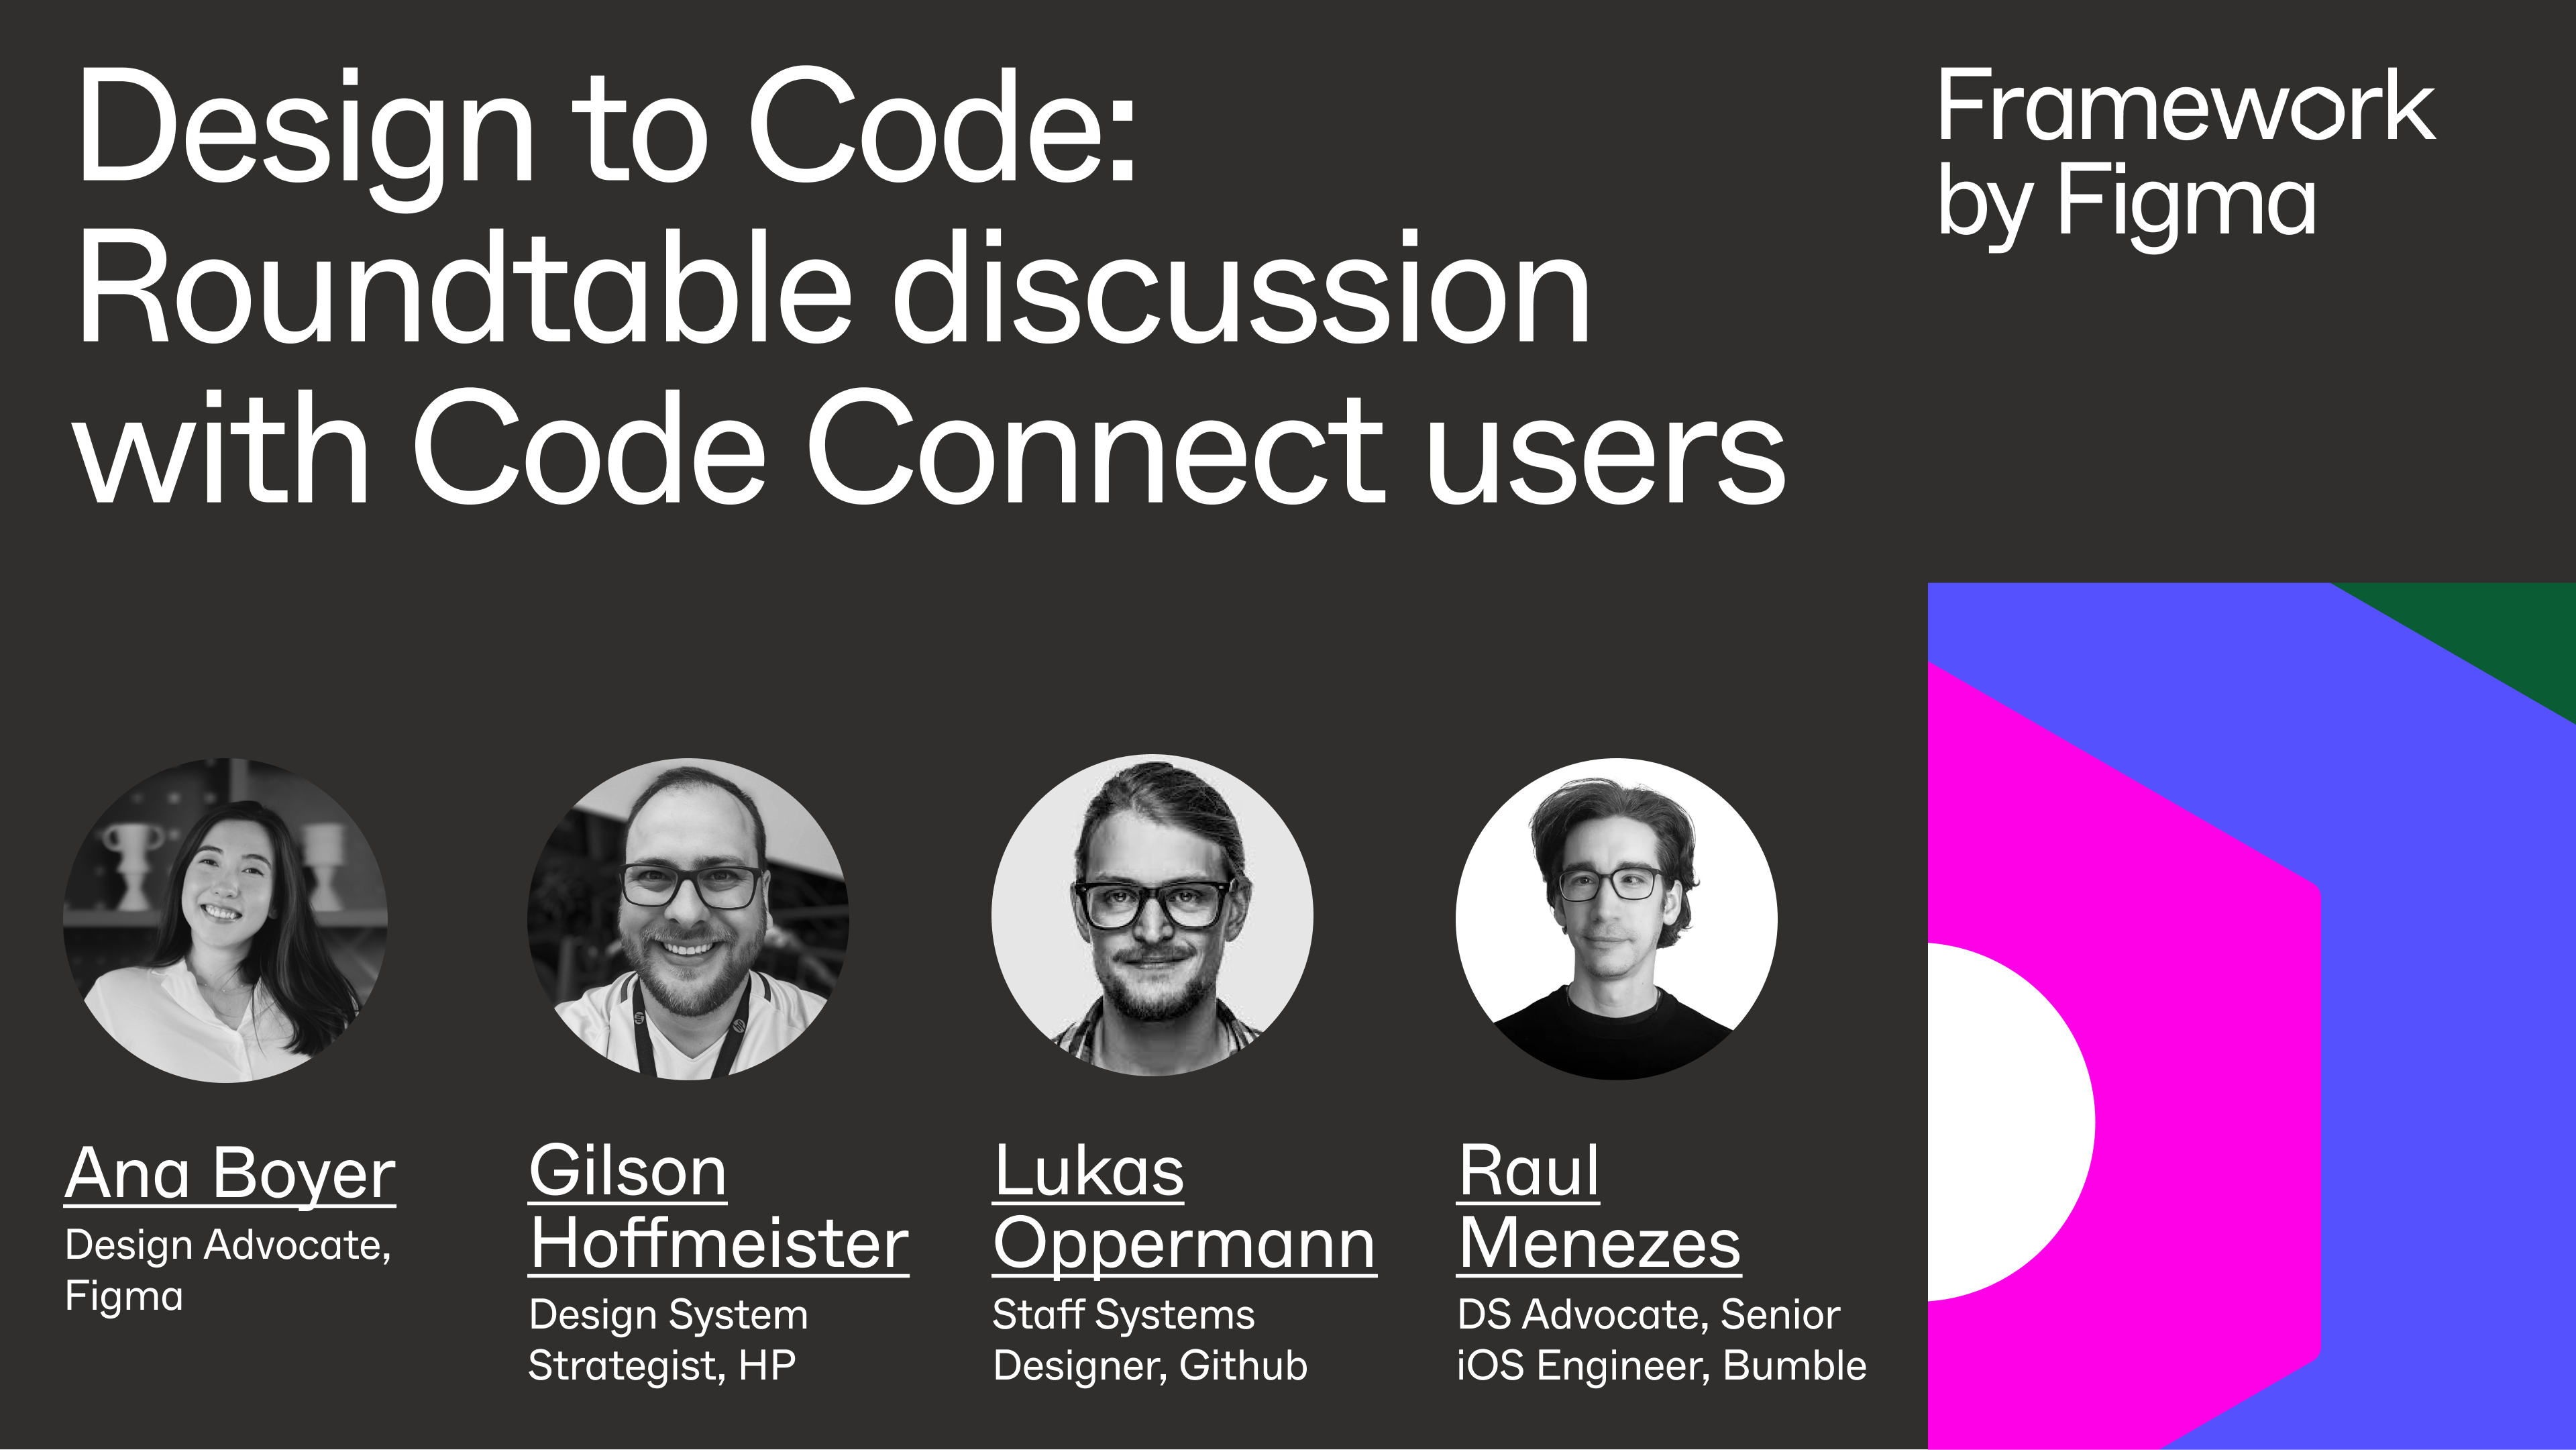 A title card with "Design to Code: Roundtable discussion with Code Connect users" text, showing portraits and names of Ana Boyer from Figma, and Gilson Hoffmeister, Lukas Oppermann, and Raul Menezes from other companies.